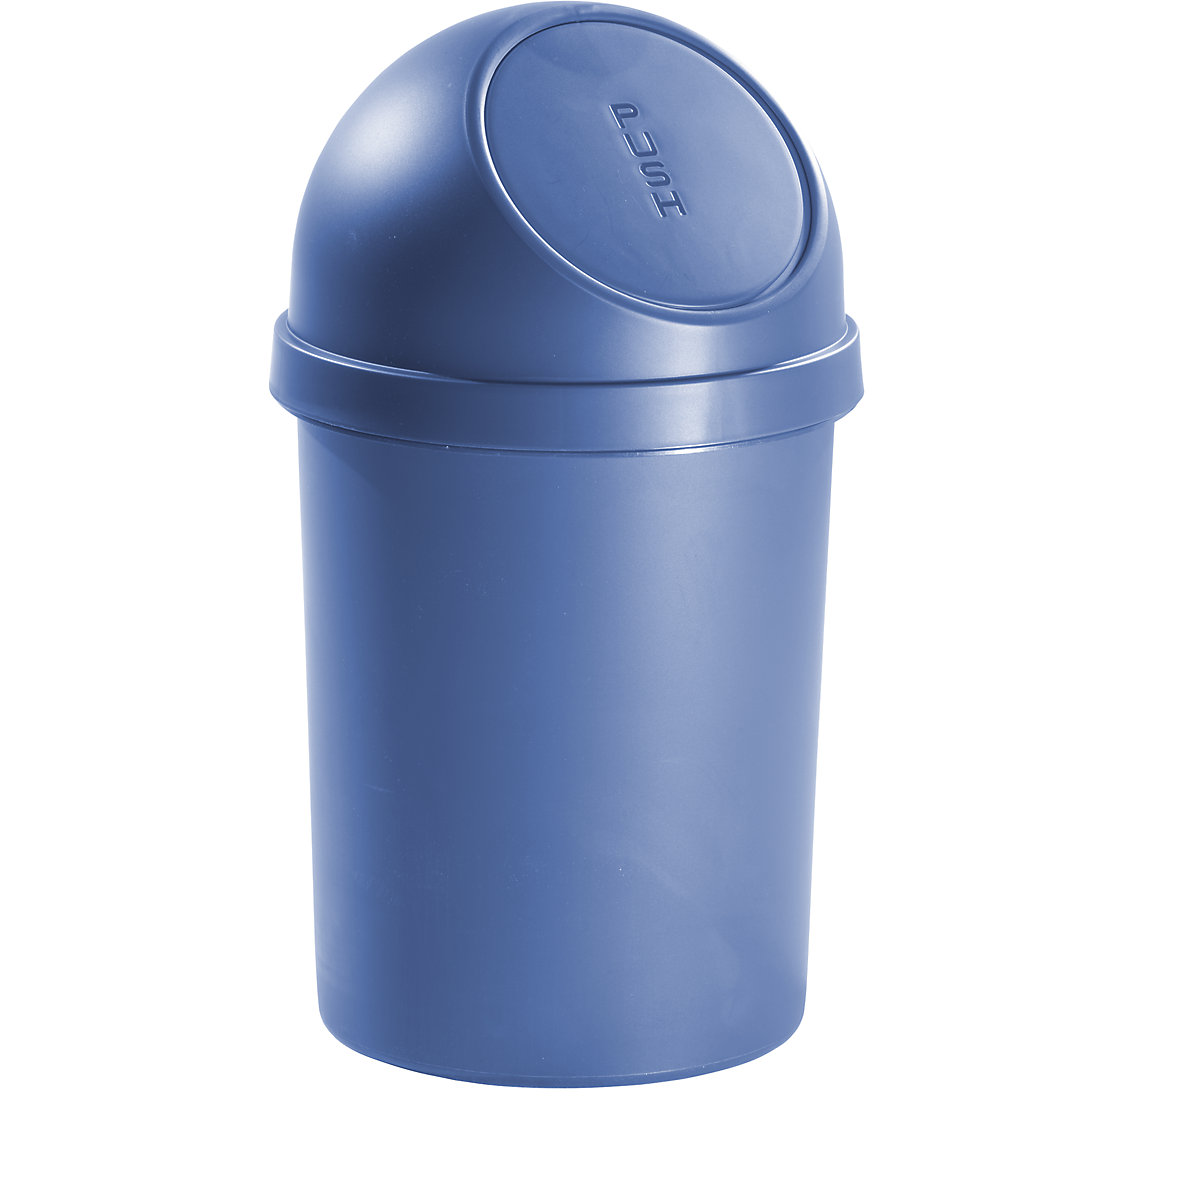 Push top waste bin made of plastic – helit, capacity 45 l, pack of 2, HxØ 700 x 400 mm, blue-5